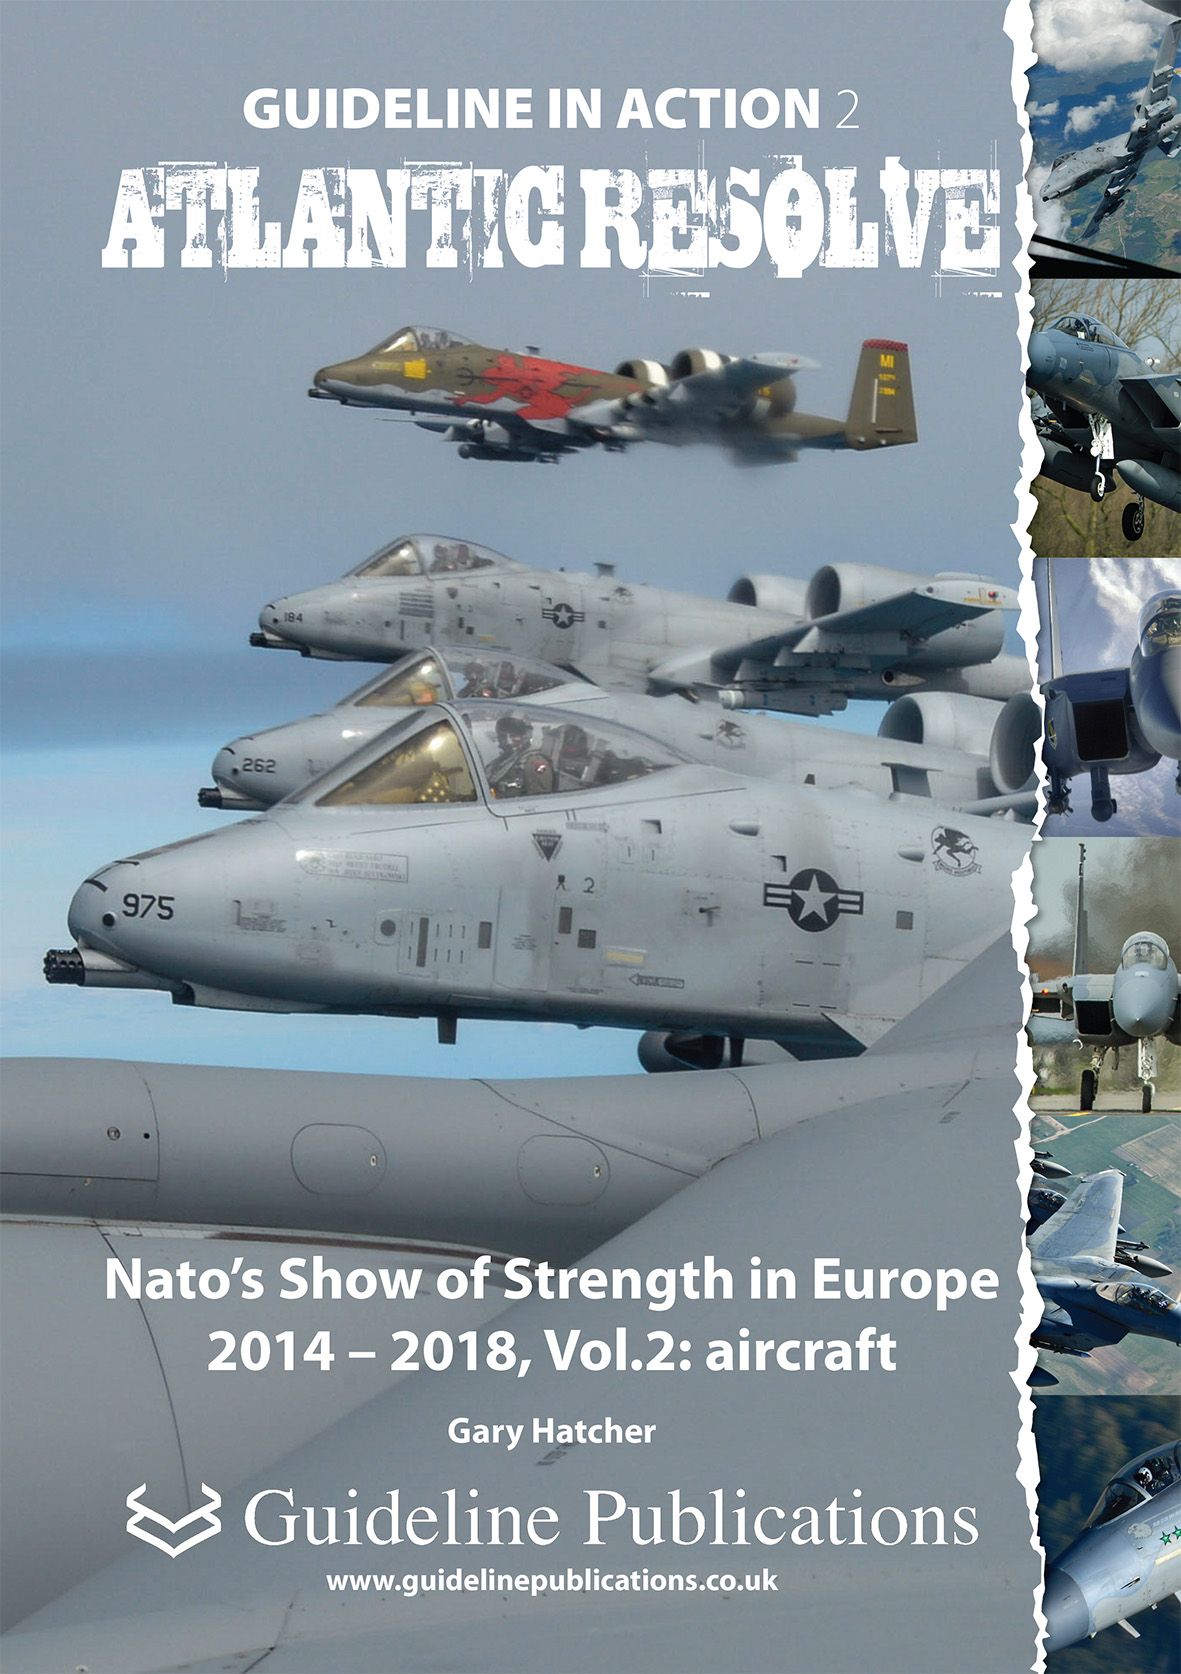 Guideline Publications Ltd Guideline in Action no 2 Atlantic Resolve NATO's show of strength in Europe 2014-2020 